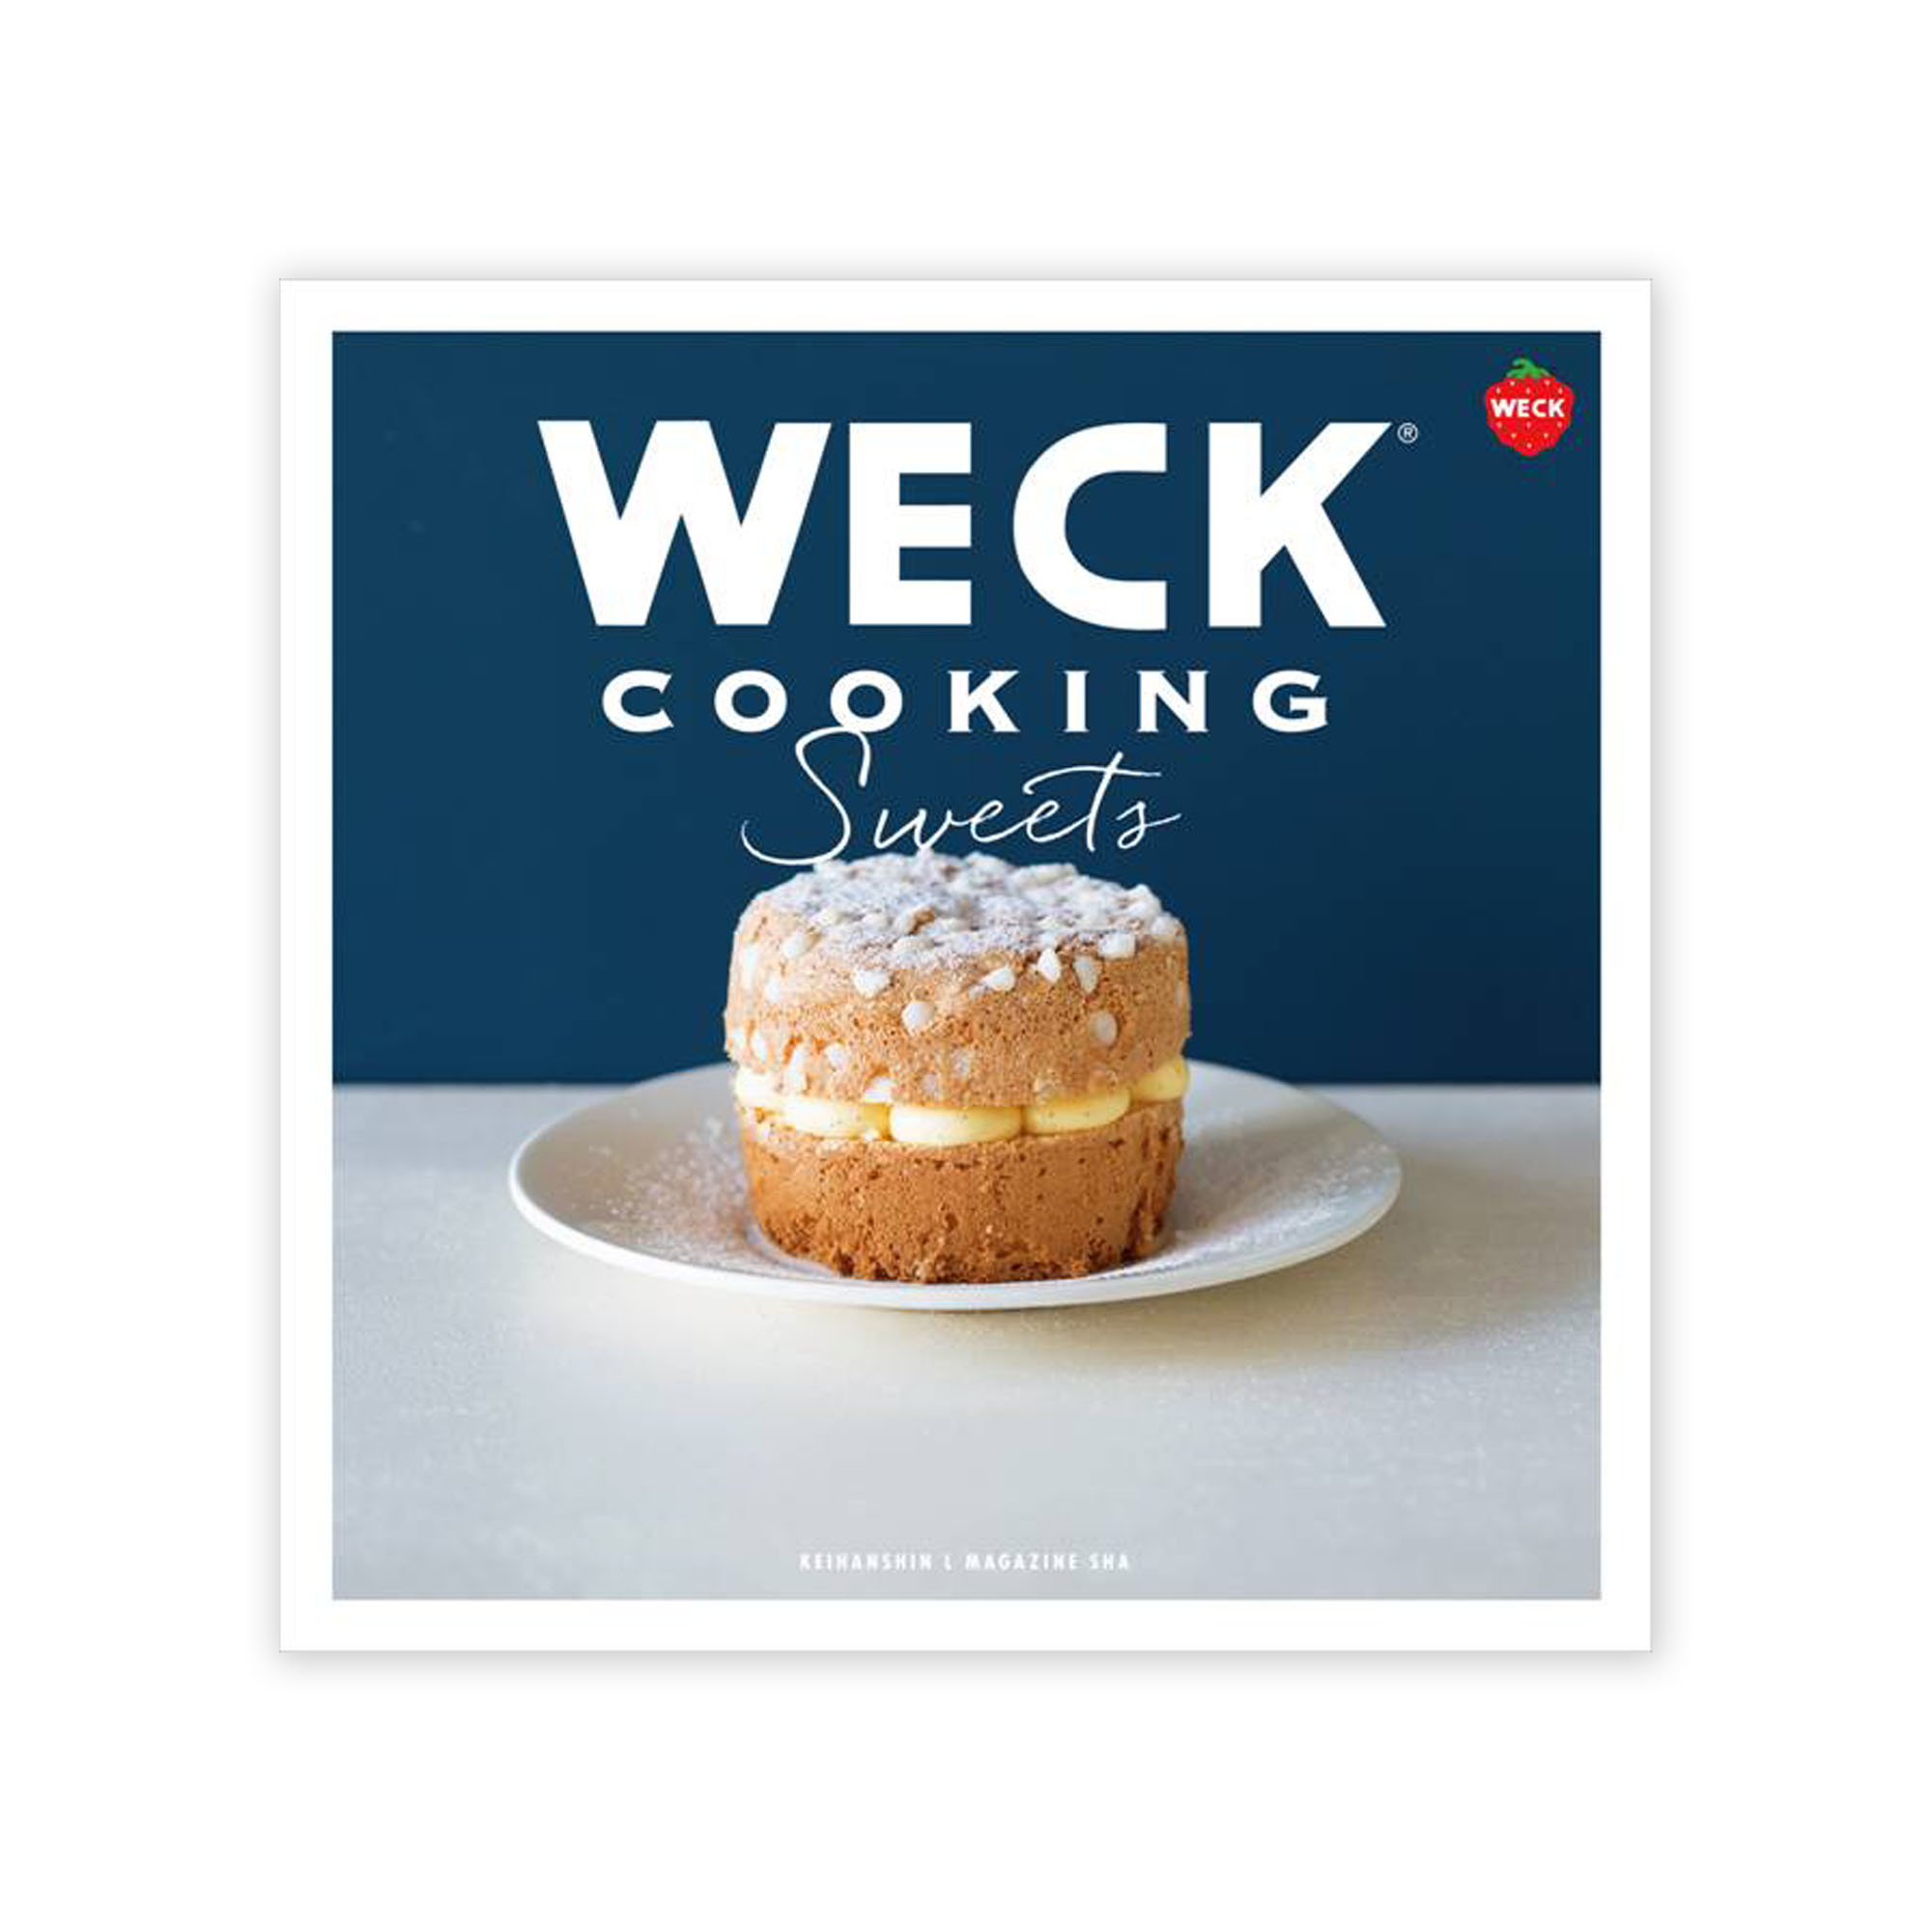 WECK COOKING sweets